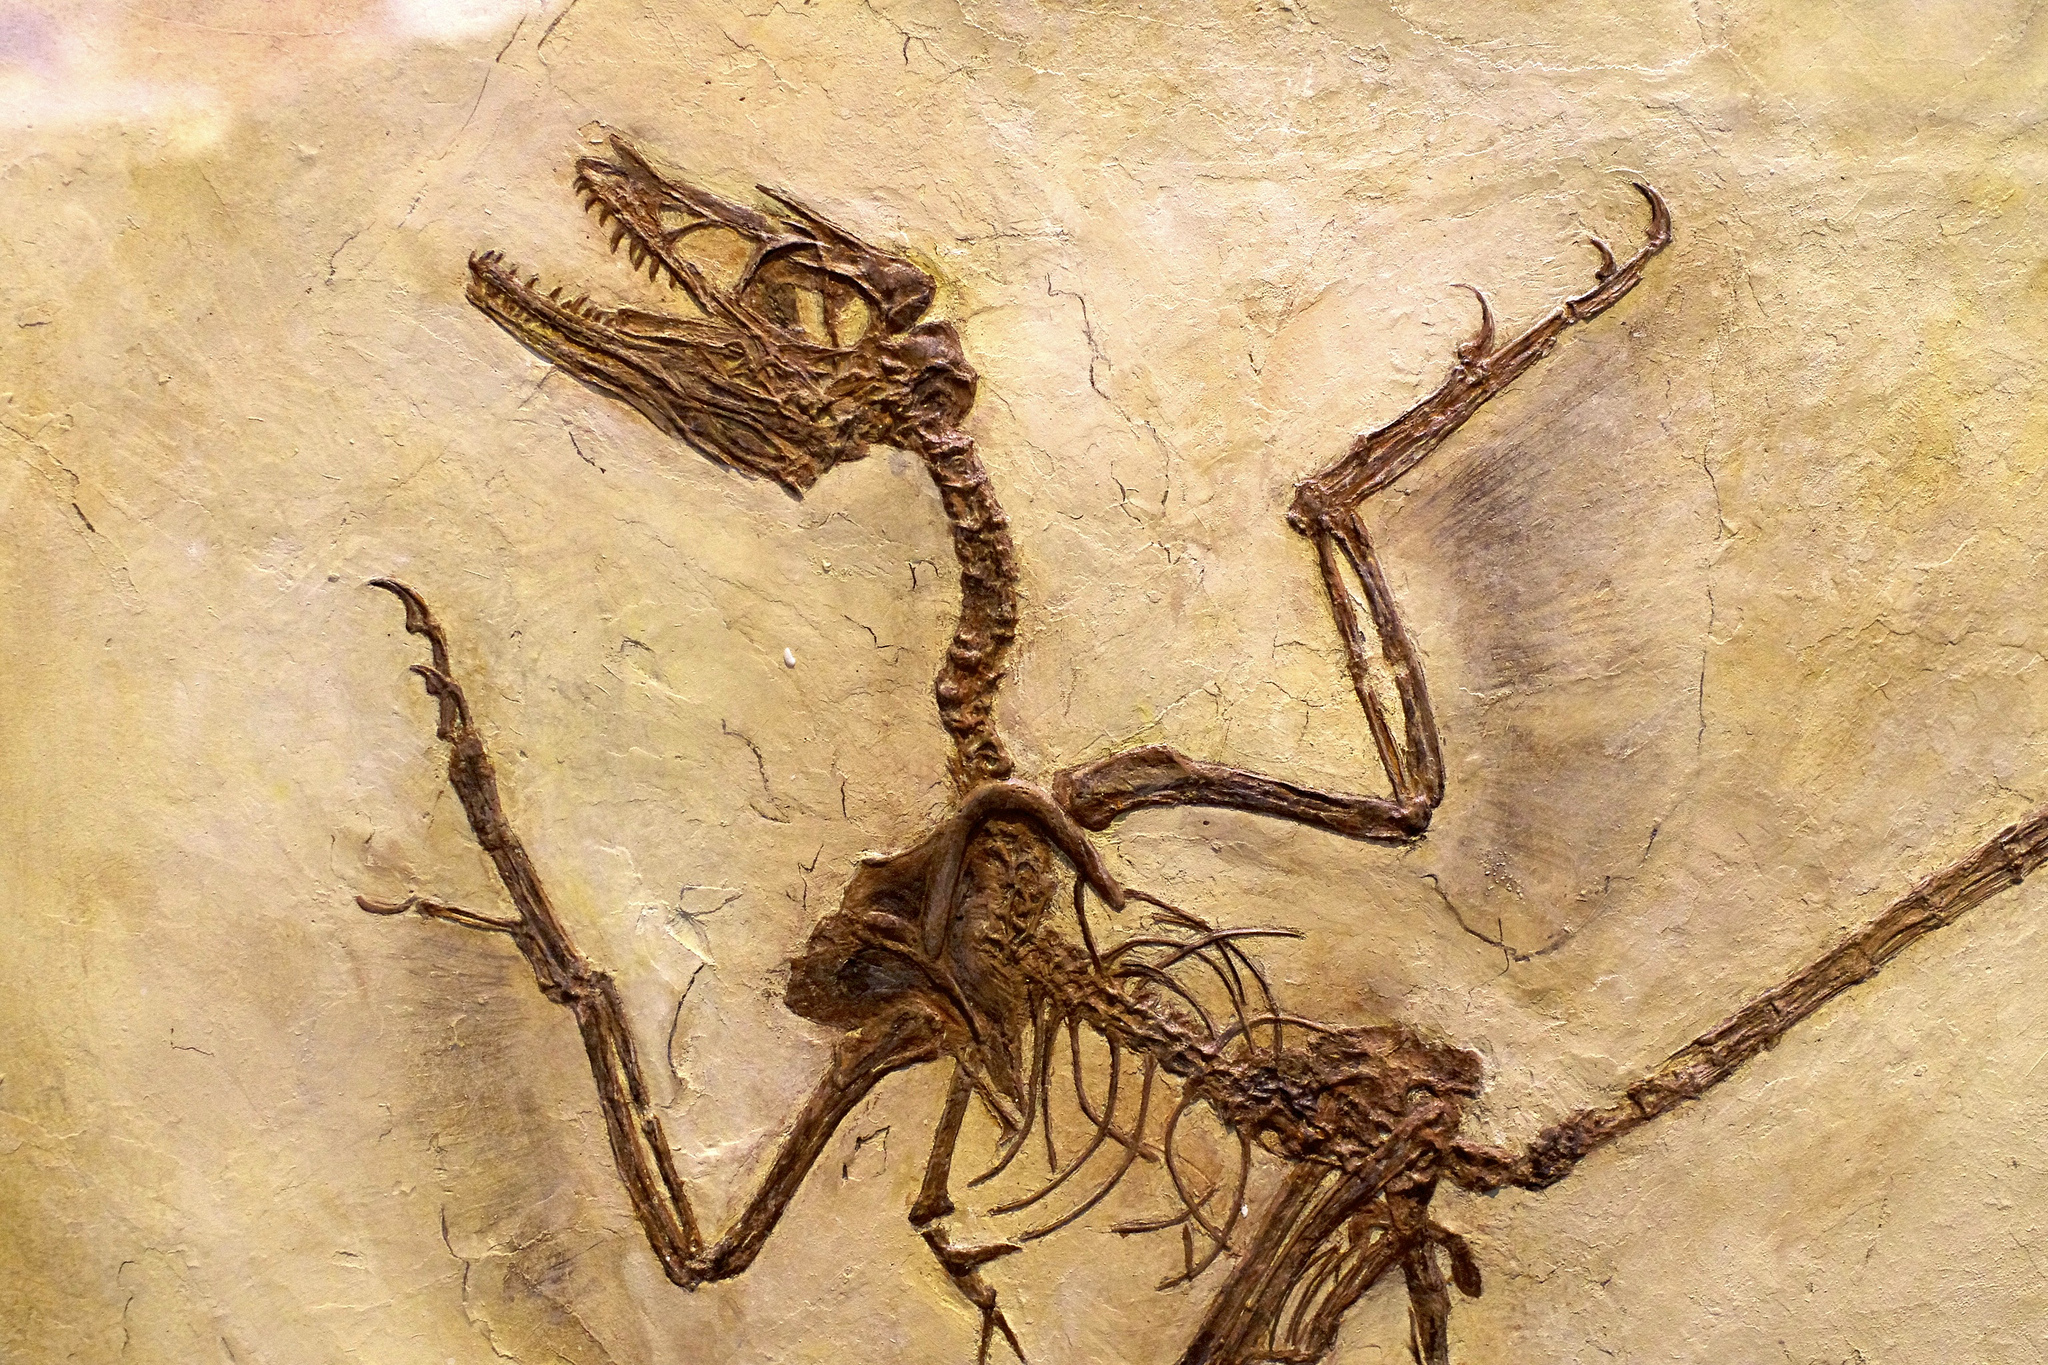 Scientists just discovered 125 million-year-old dinosaur dandruff